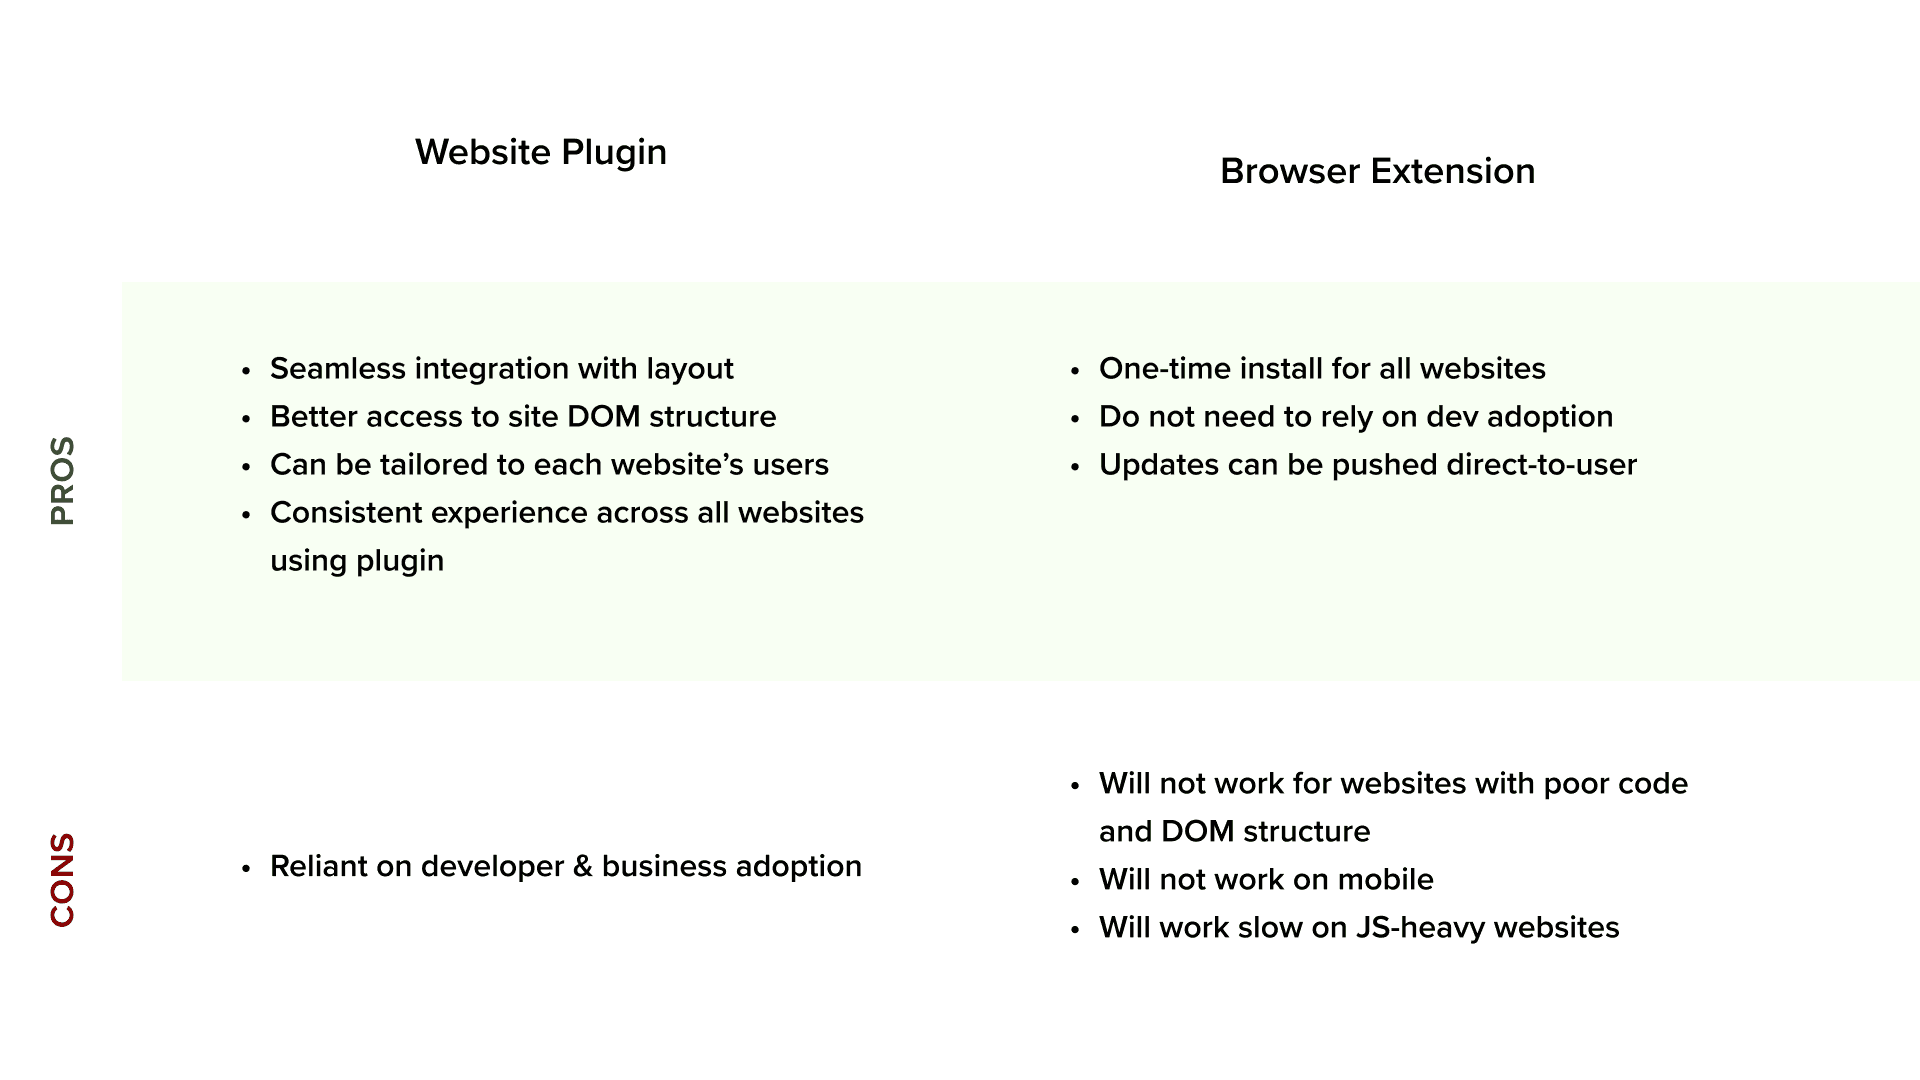 Browser extension vs in-site plugin